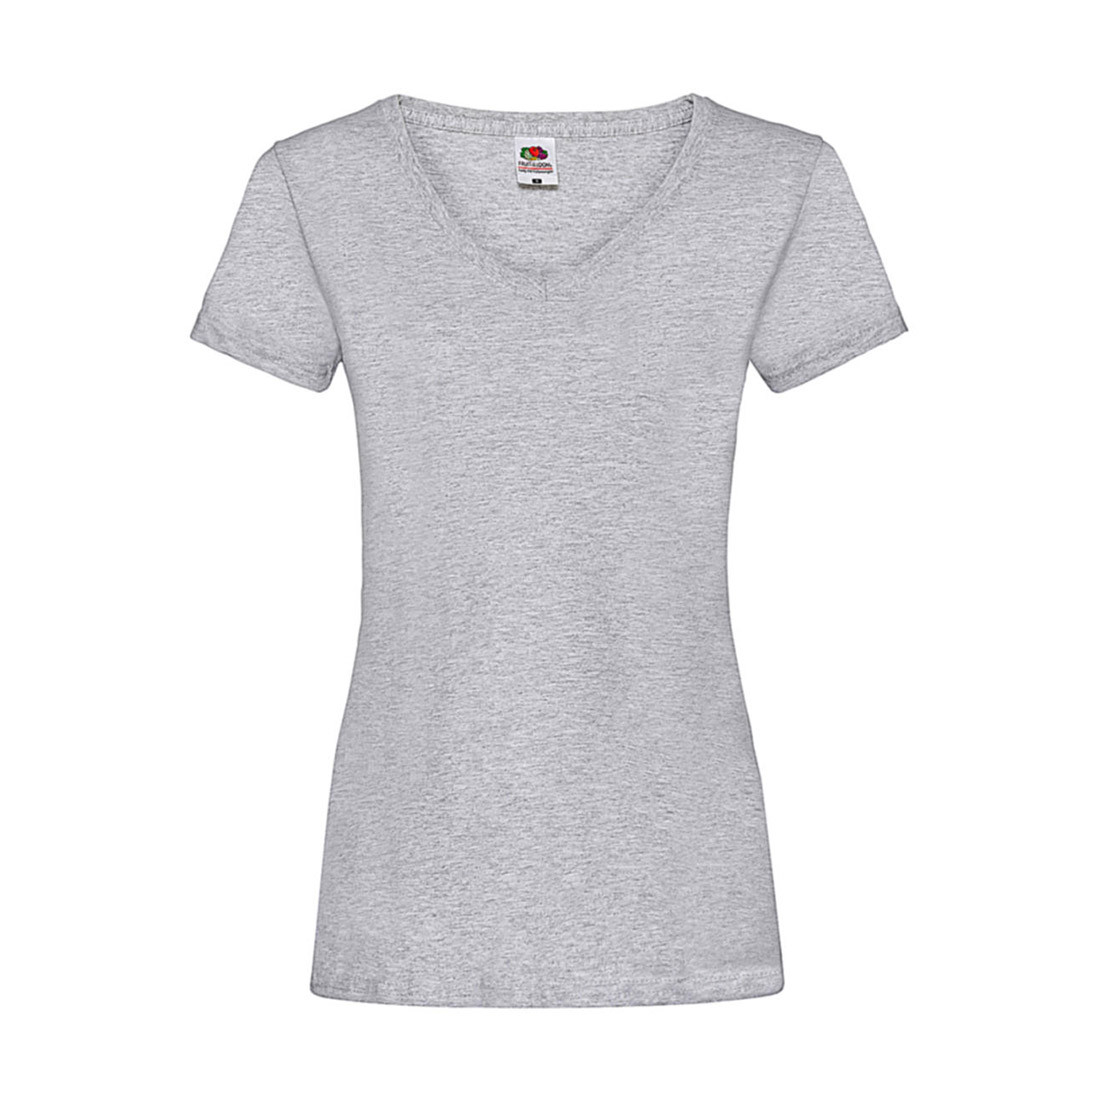 Lady-Fit Valueweight V-neck T - Safetywear